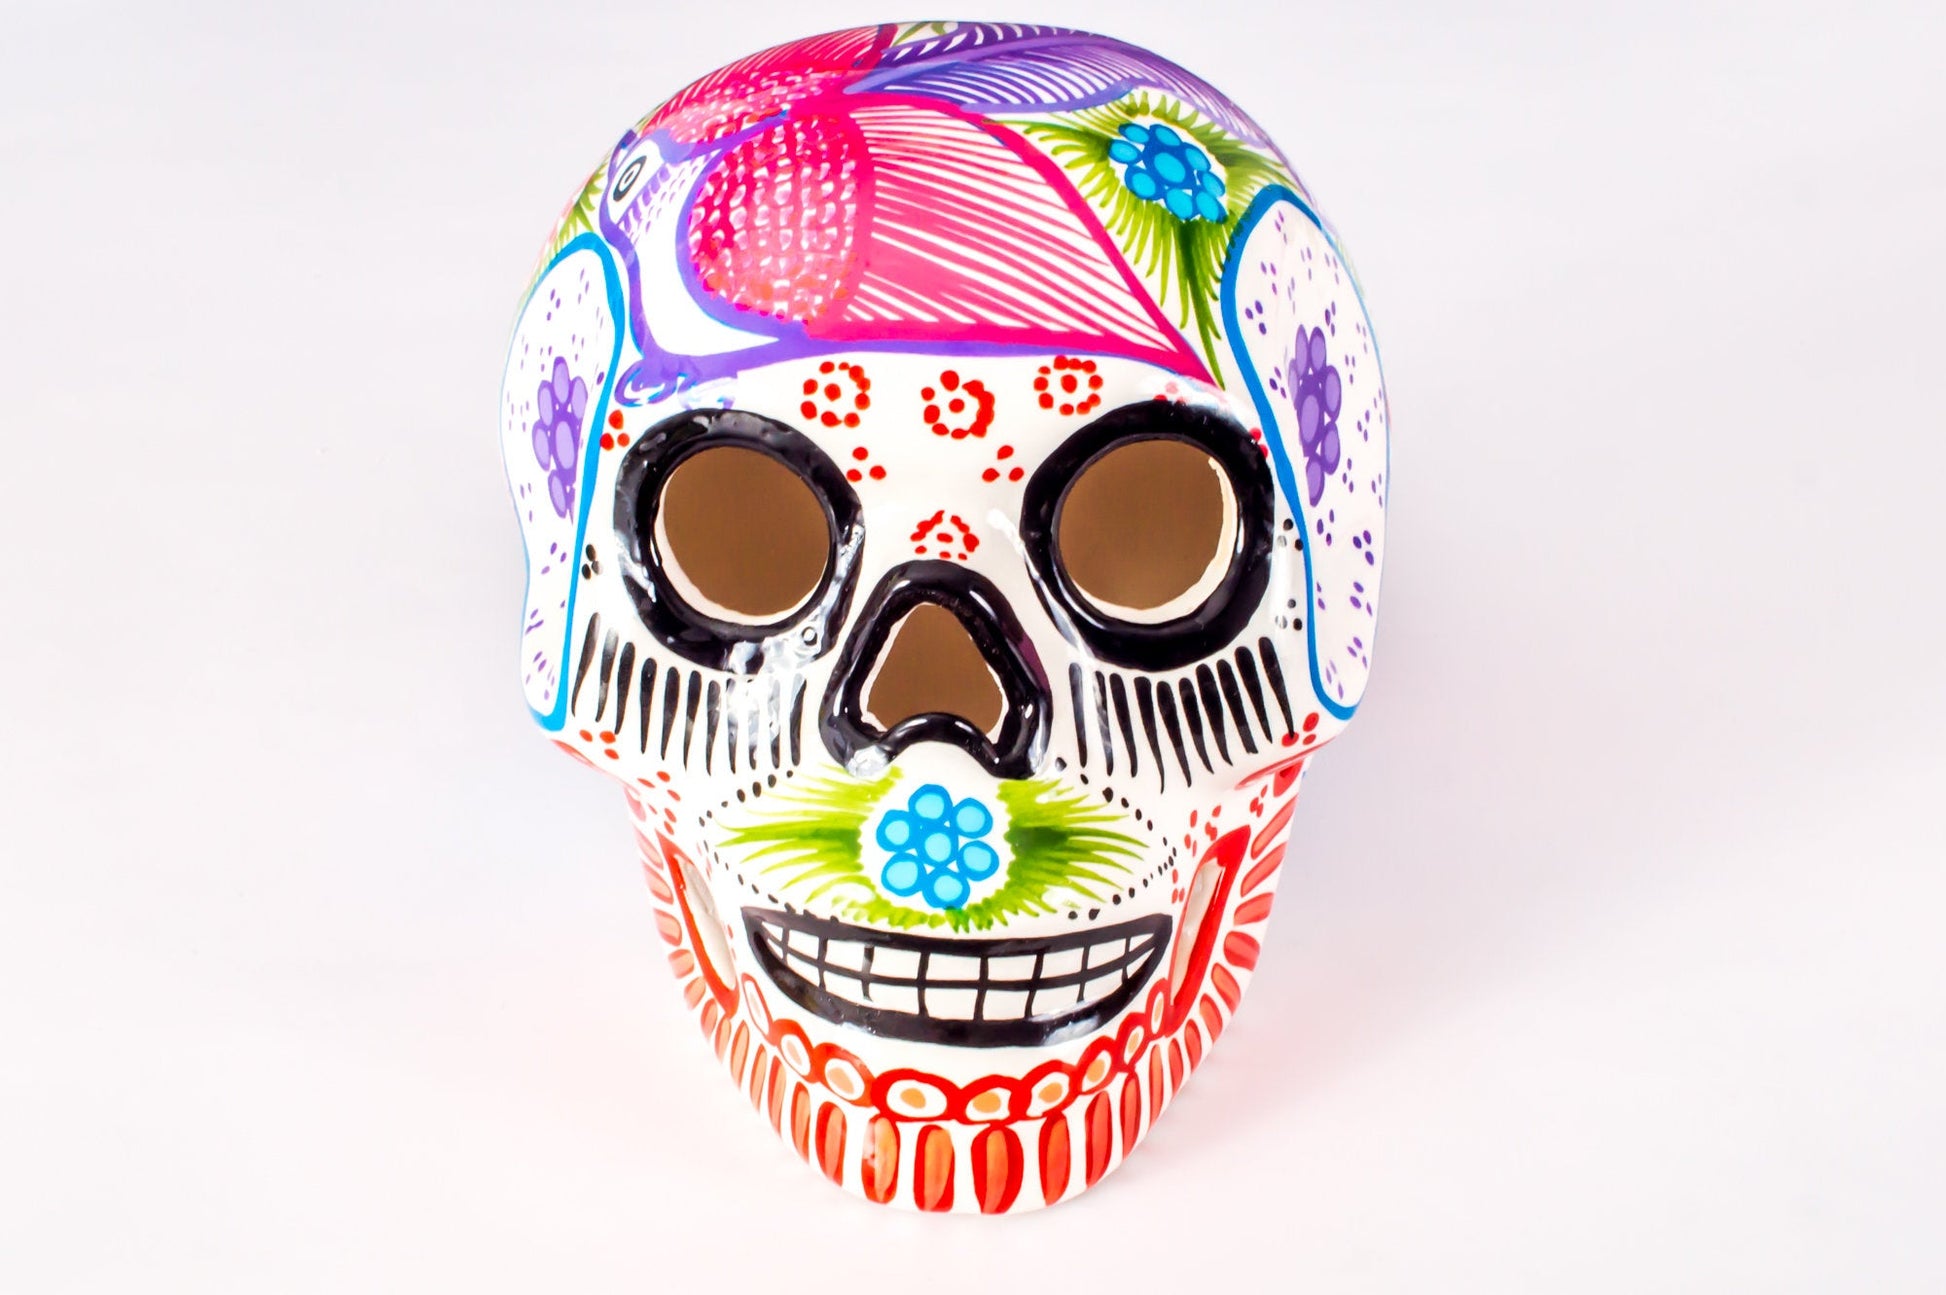 Large Ceramic Skulls Wholesale x 20 | Hand-painted With Love In Mexico By Traditional Huichol Artist - ARTMEXICO